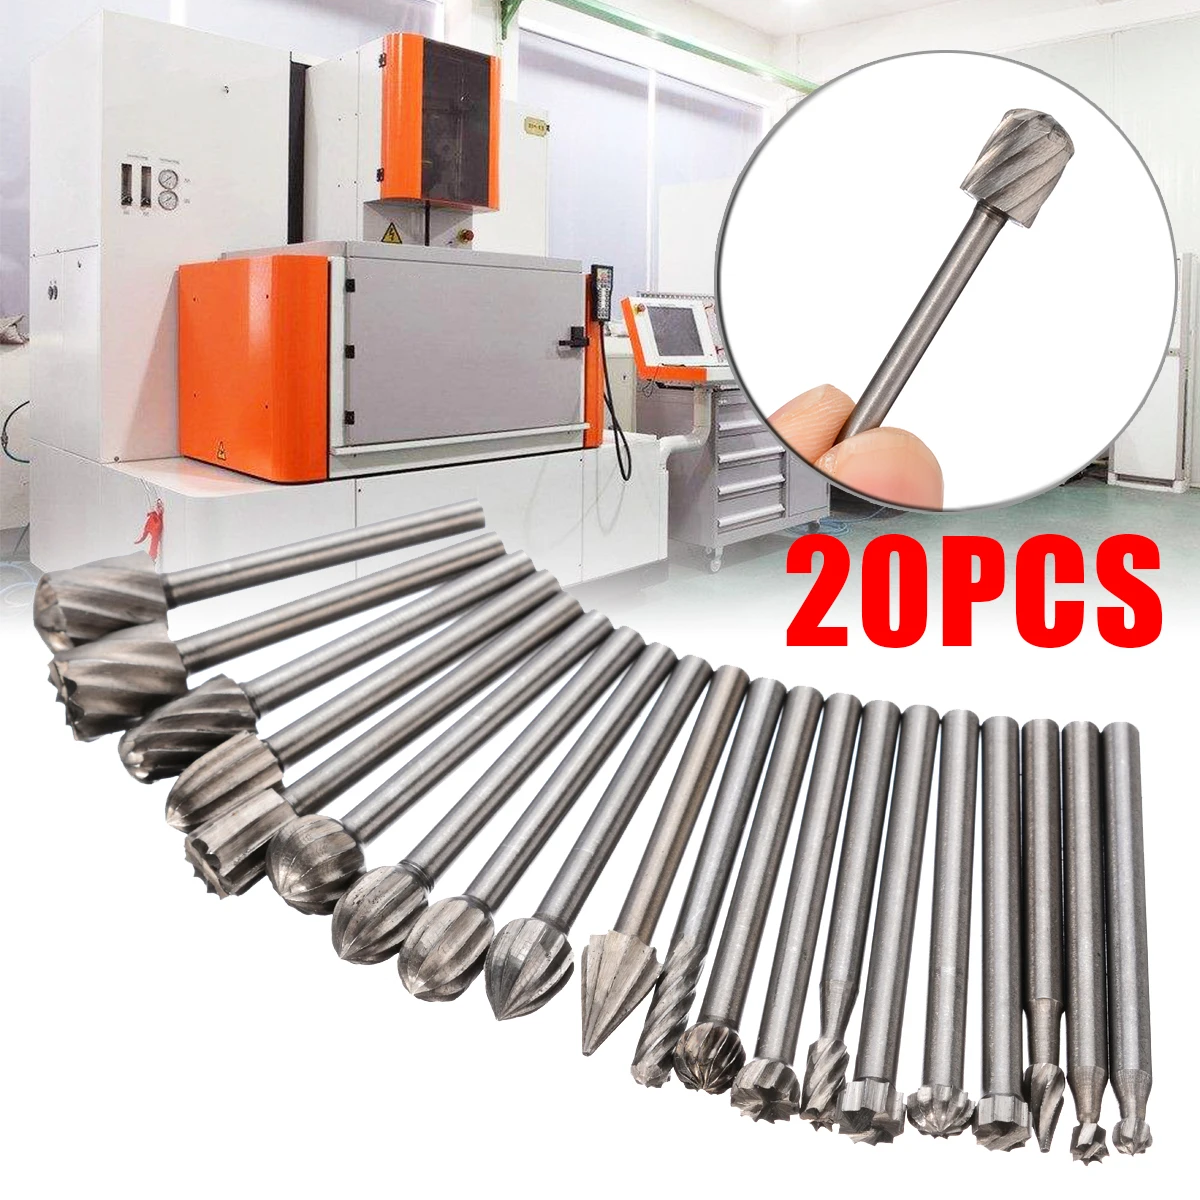 20pcs Wood Carving Milling Cutter Set Durable HSS Routing Router Bits Burr Milling Cutter for Rotary Engraving Machine Tool